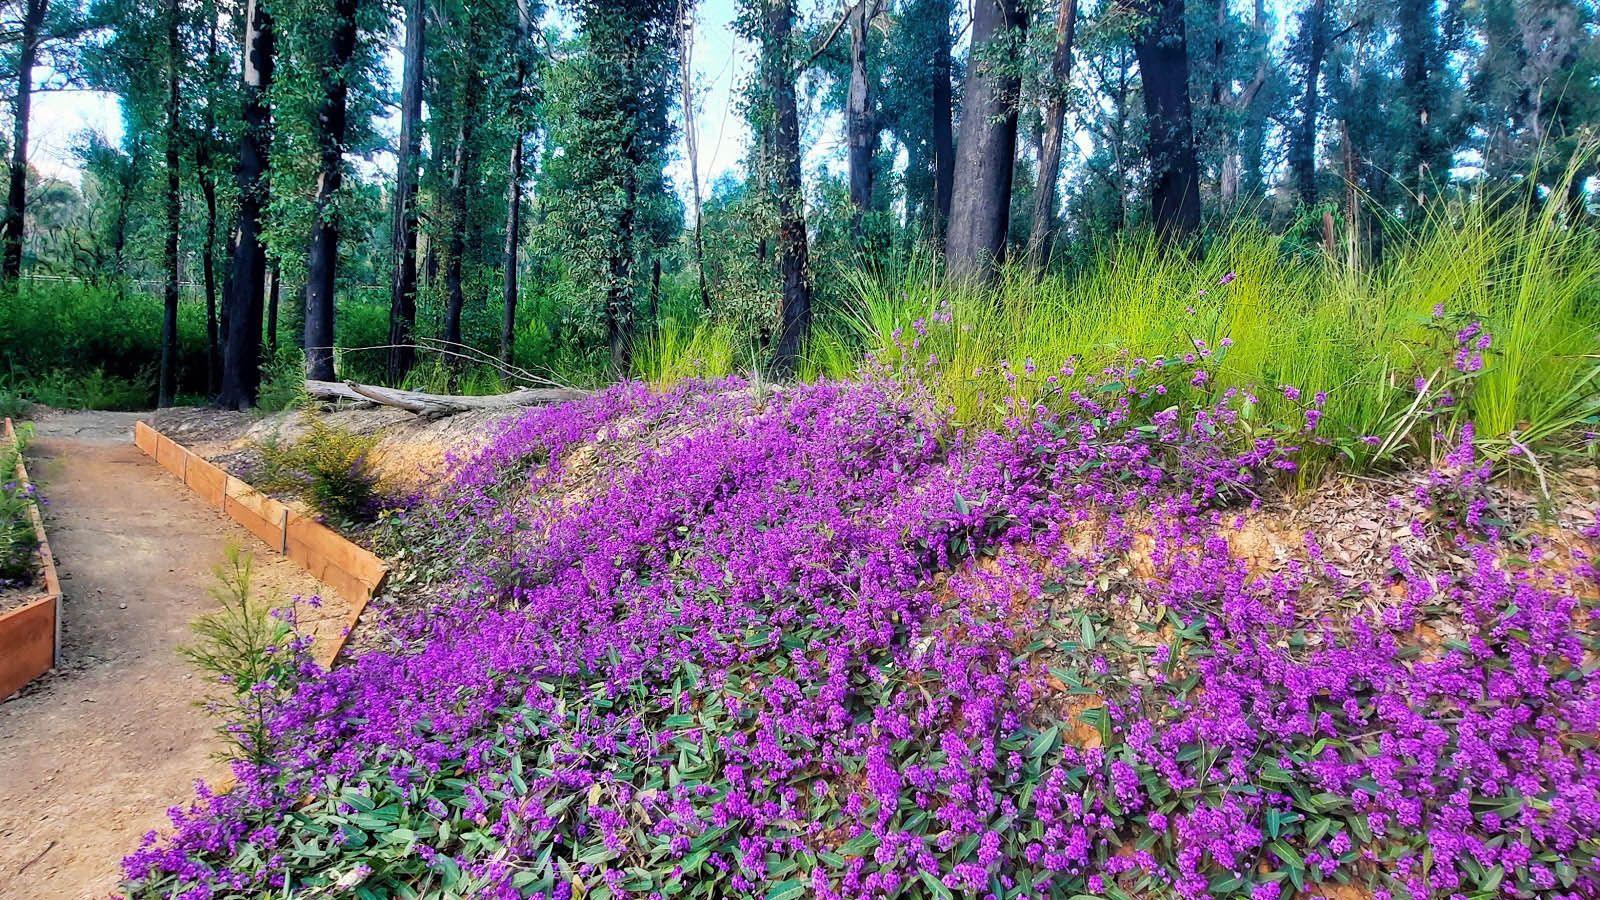 Bright purple flowers covering a small hillside next to a walking path. banner image